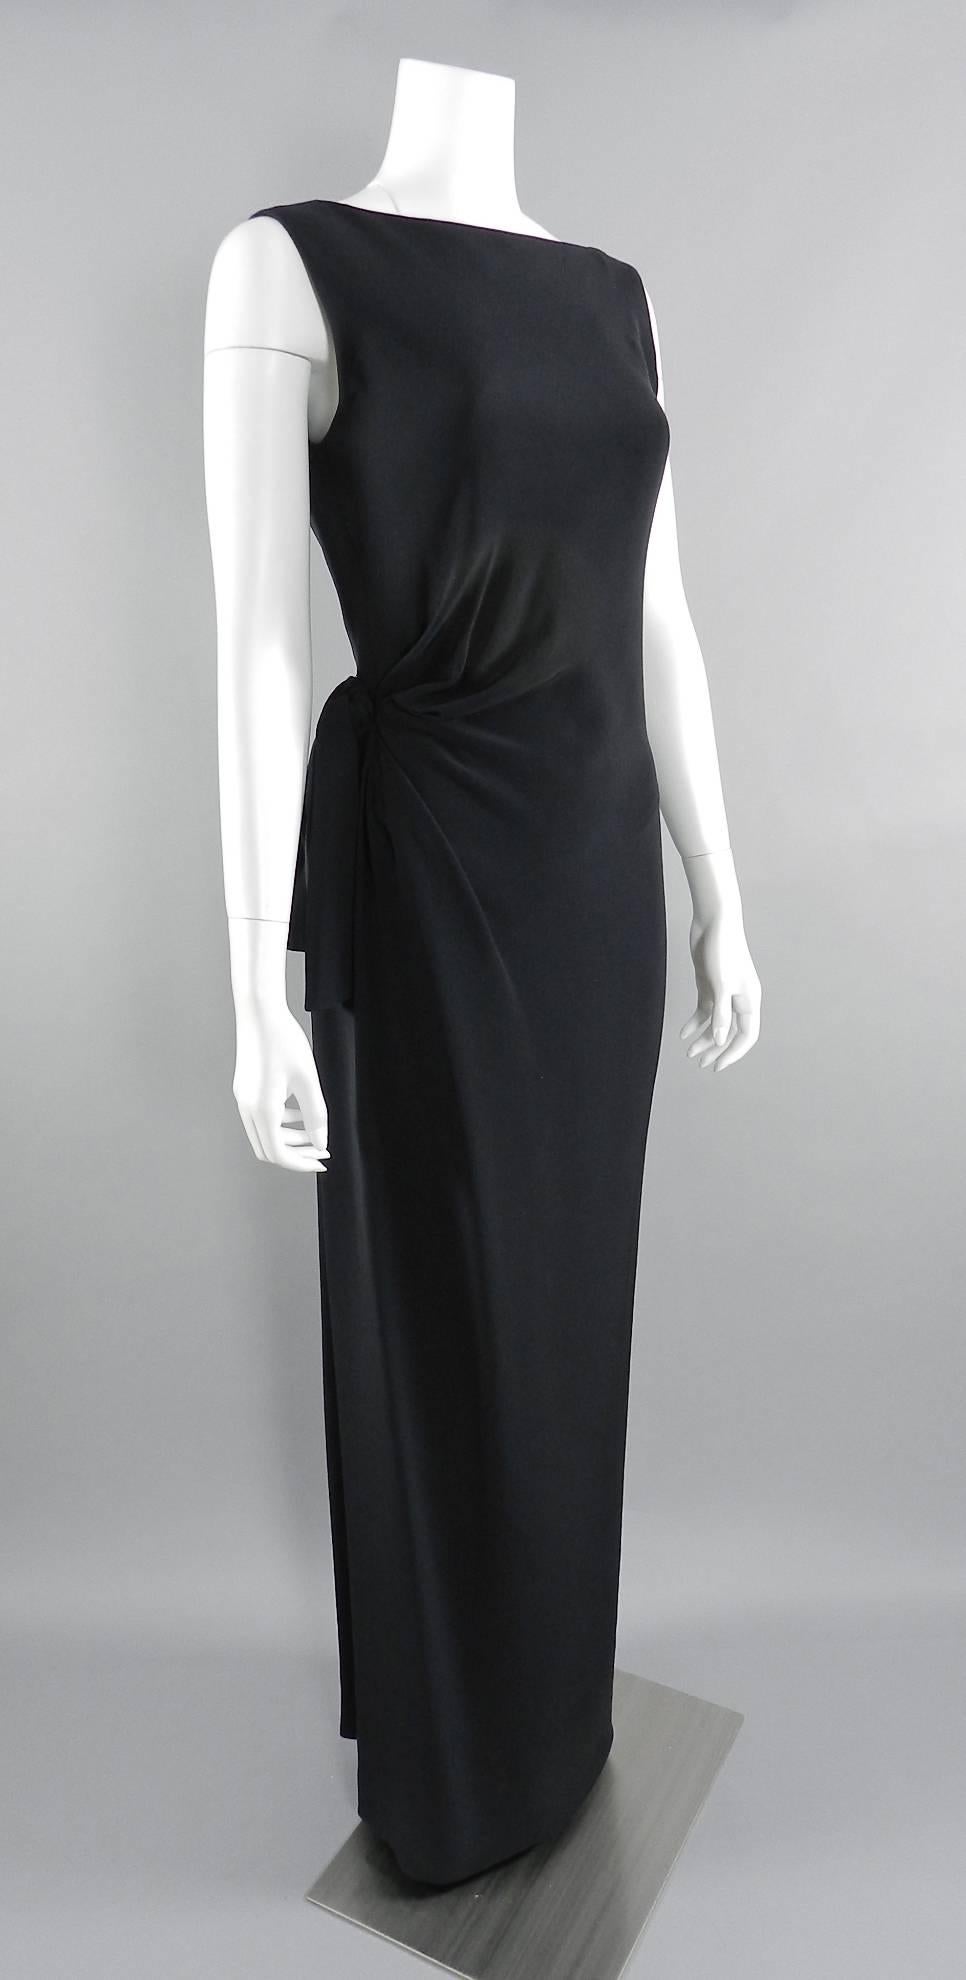 Yves Saint Laurent AW 1998 Haute Couture Black Low Back Evening Gown In Excellent Condition For Sale In Toronto, ON